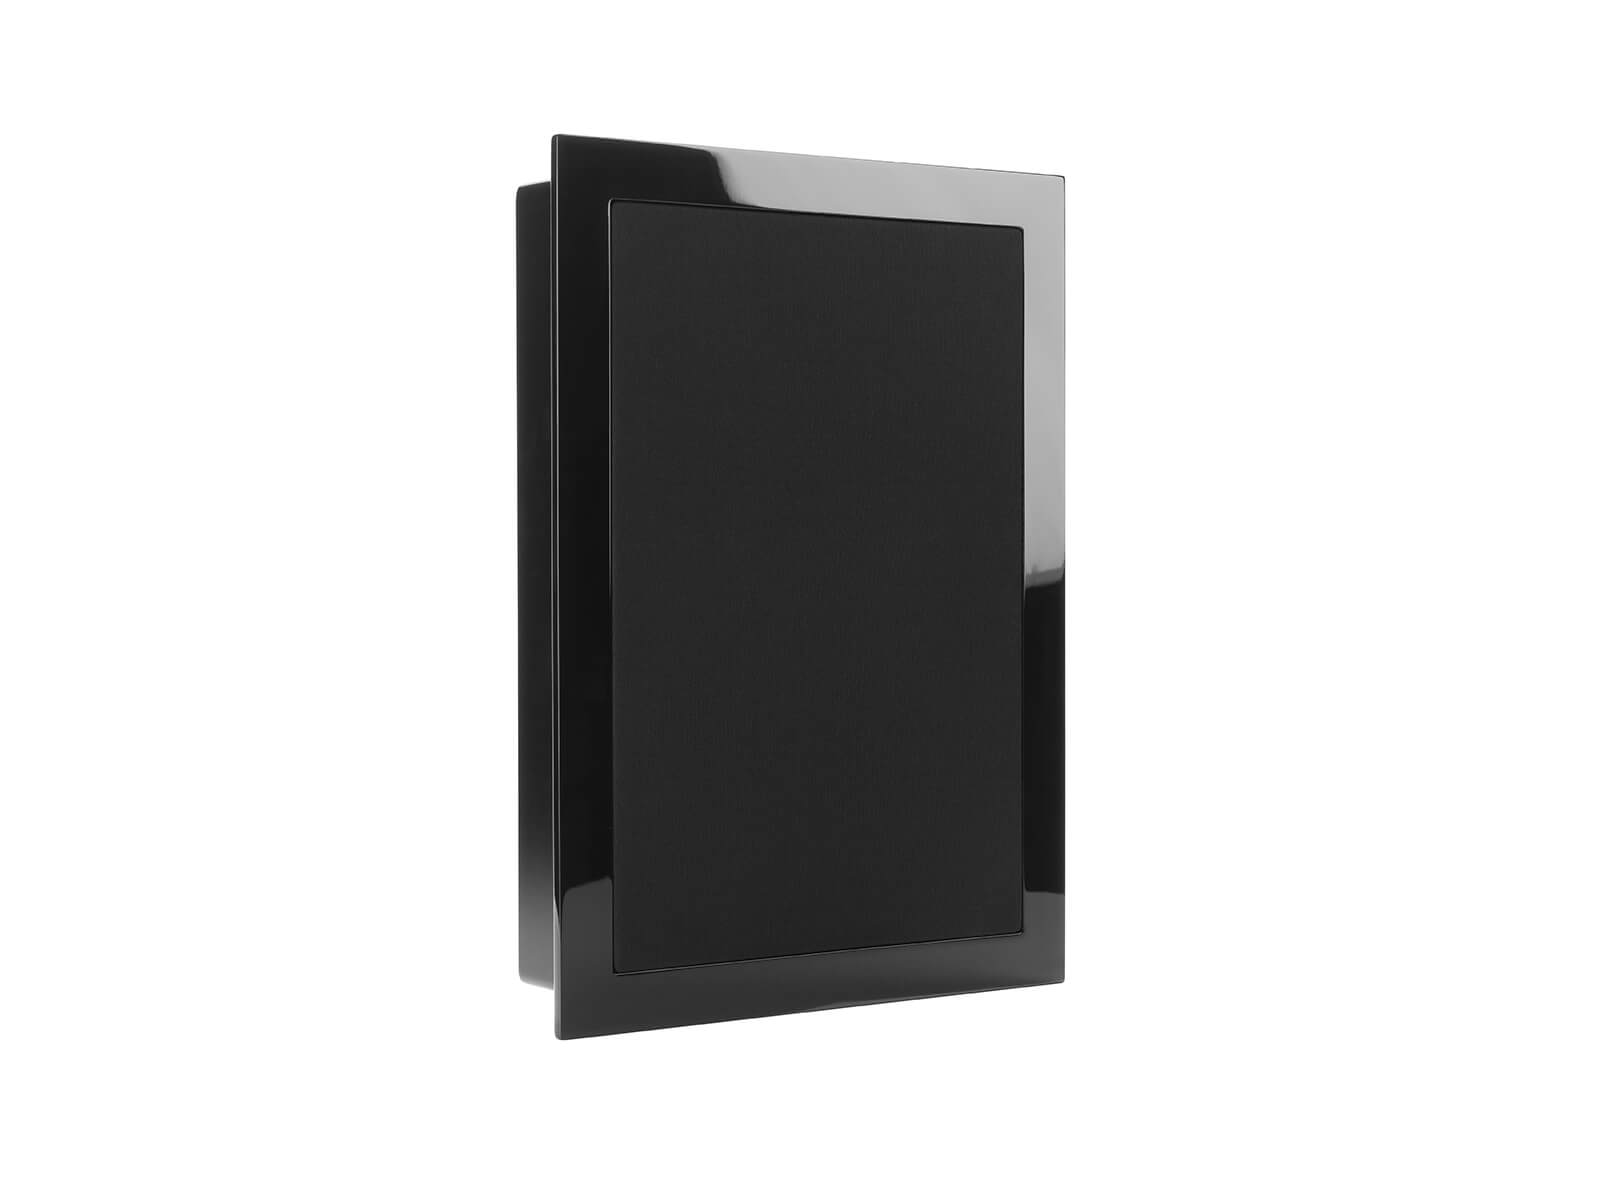 SoundFrame SF1, on-wall speakers, with a high gloss black lacquer finish.